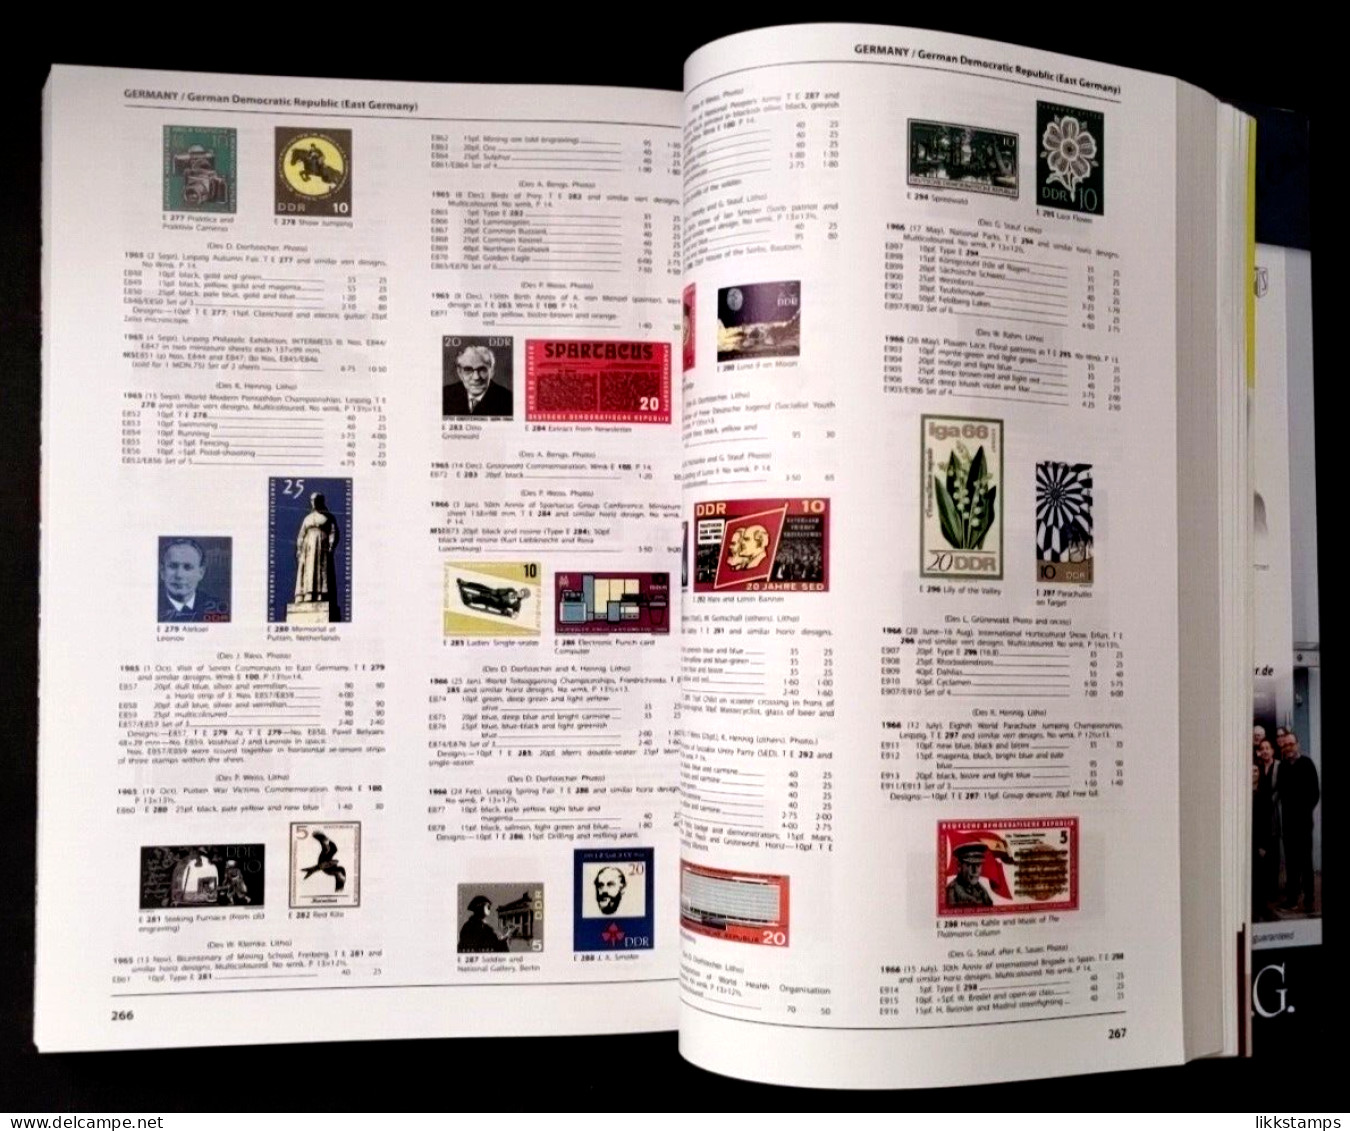 STANLEY GIBBONS GERMANY STAMP CATALOGUE 12th EDITION 2018 #L0150 - Germany